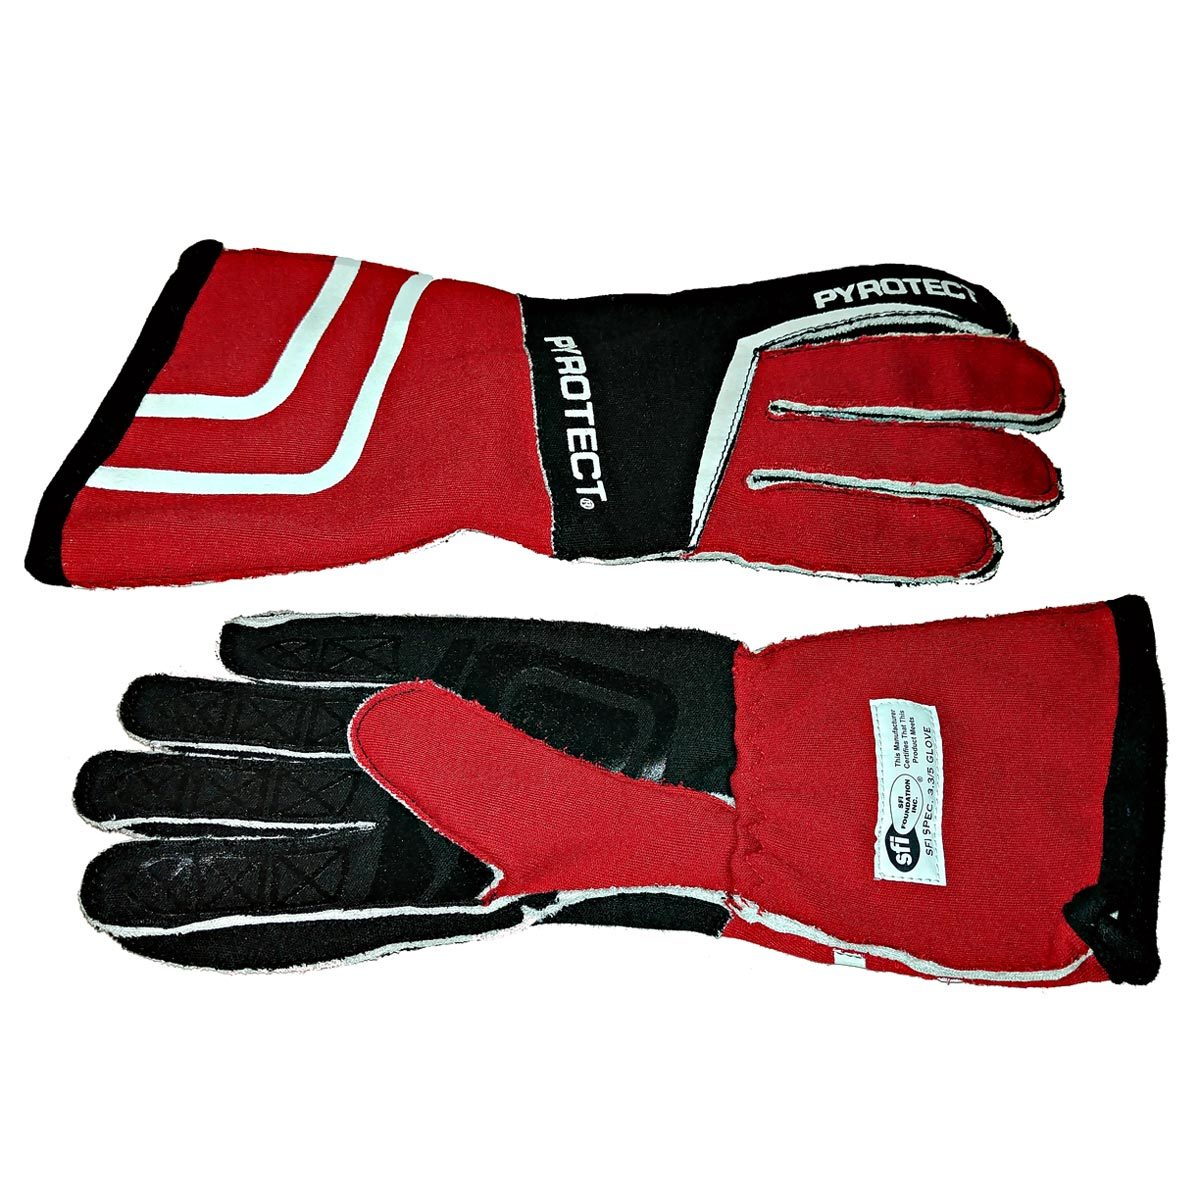 Pyrotect Glove Sport 2 Layer Blk/ Red X-Large SFI-5 Safety Clothing Driving Gloves main image